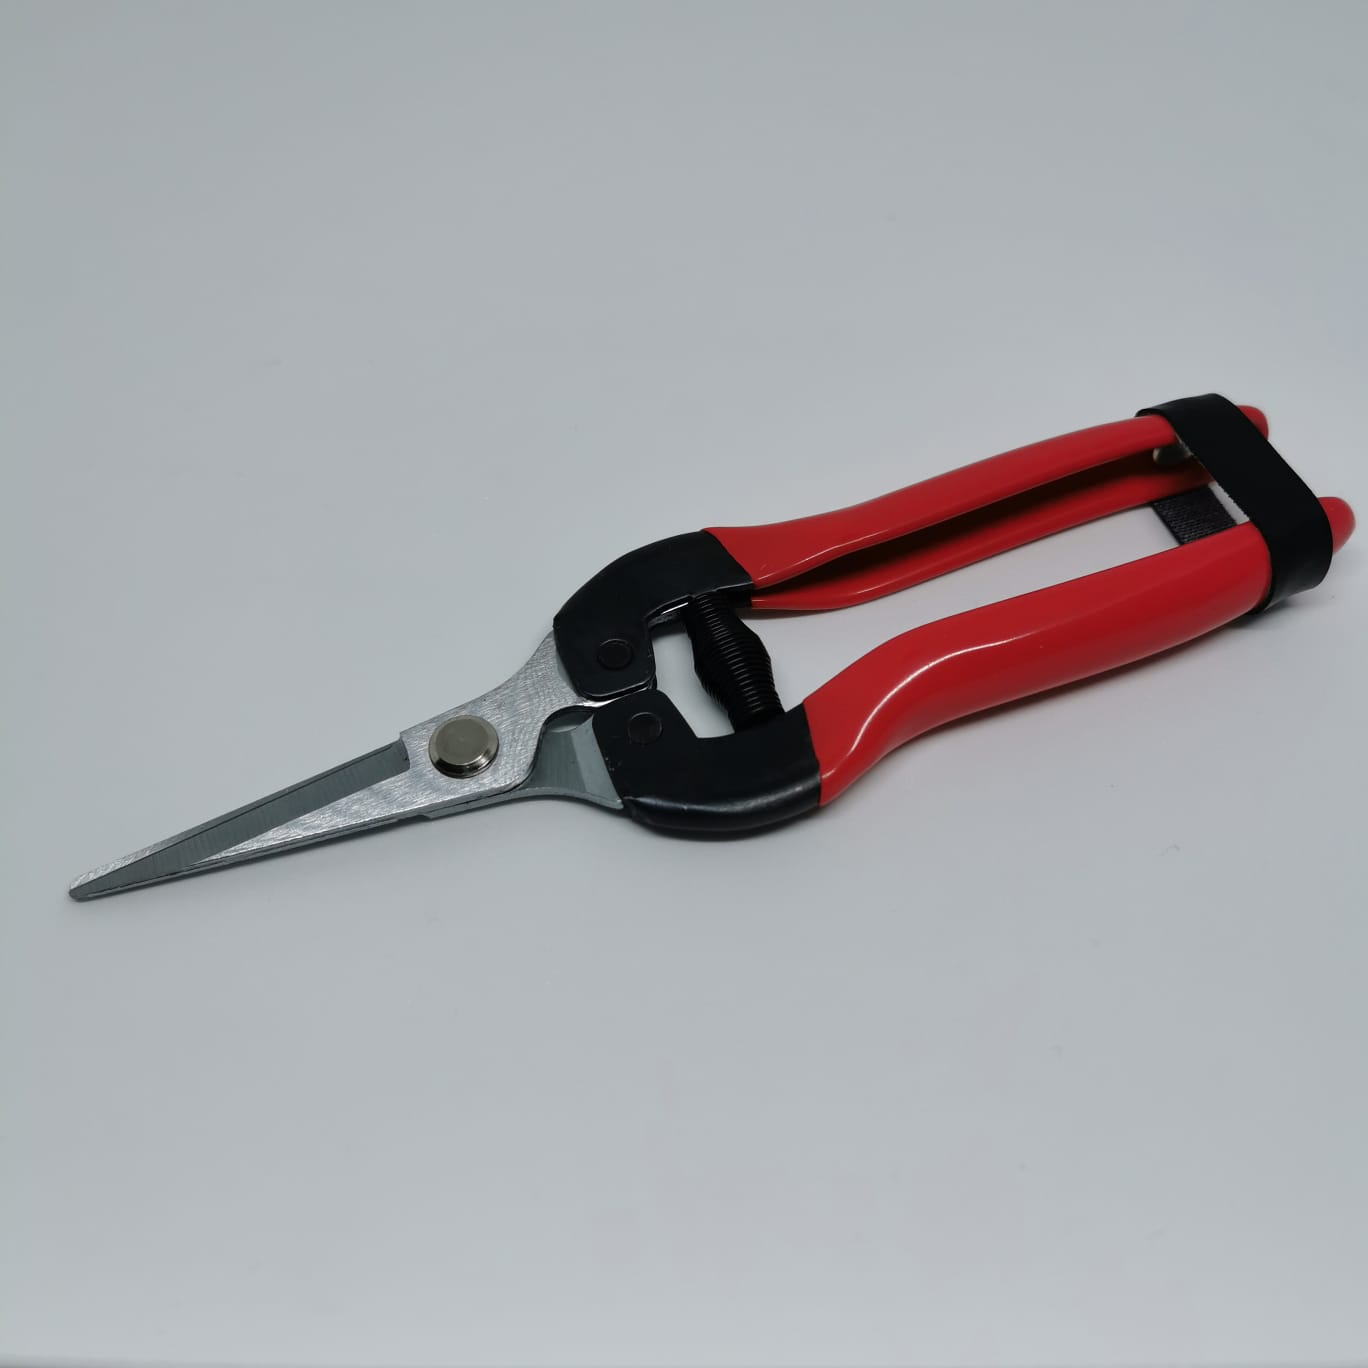 Two sharp bypass blades ensure clean efficient cutting of all green stems